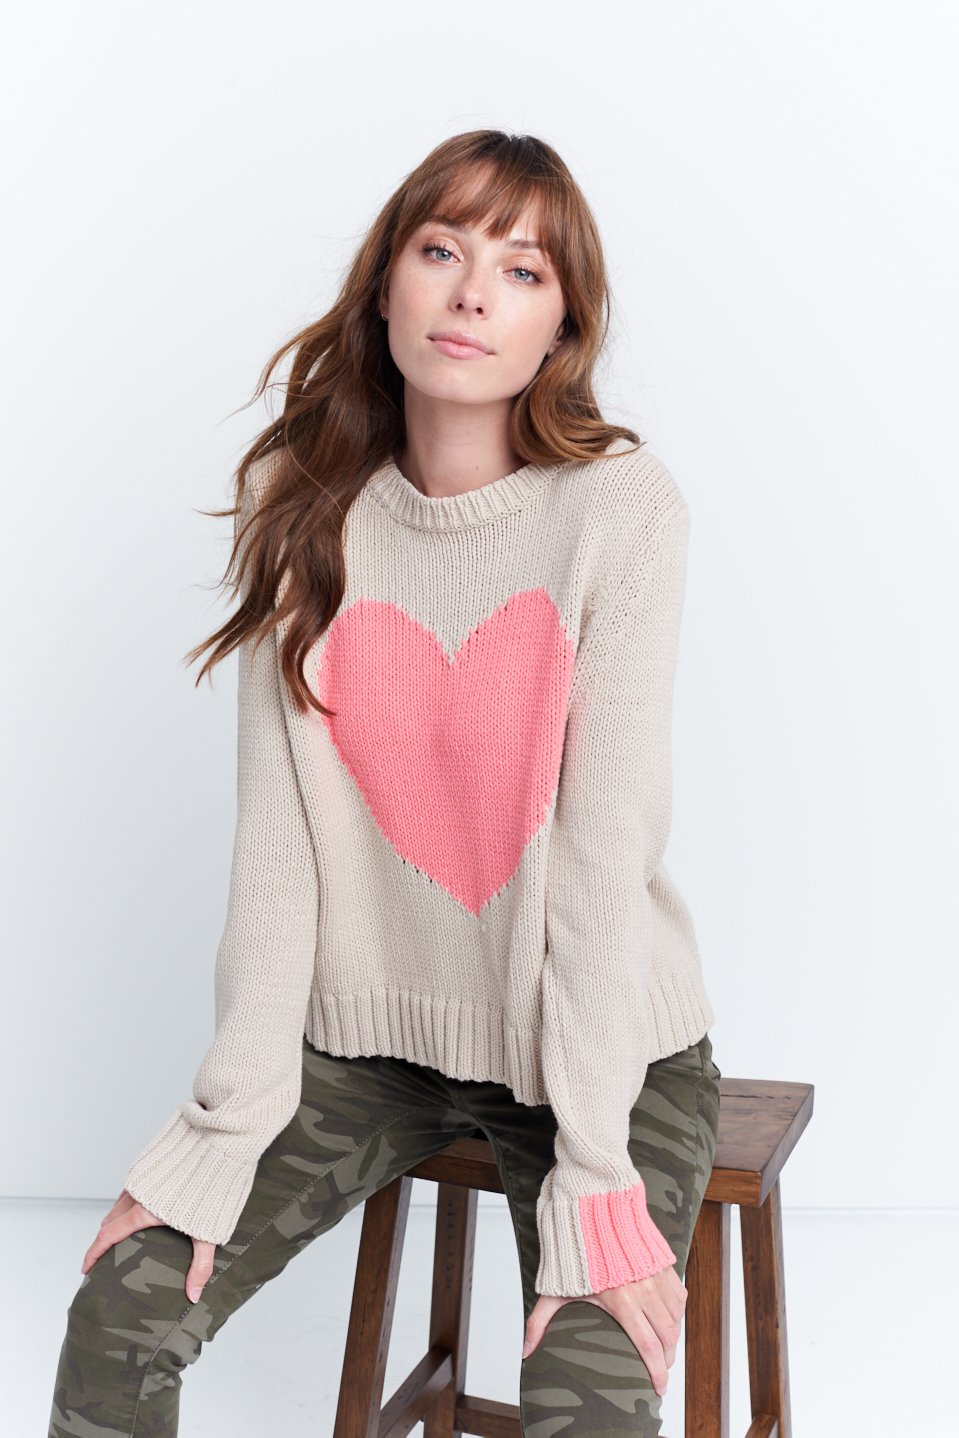 LISA TODD MAD LOVE SWEATER IN NATURAL